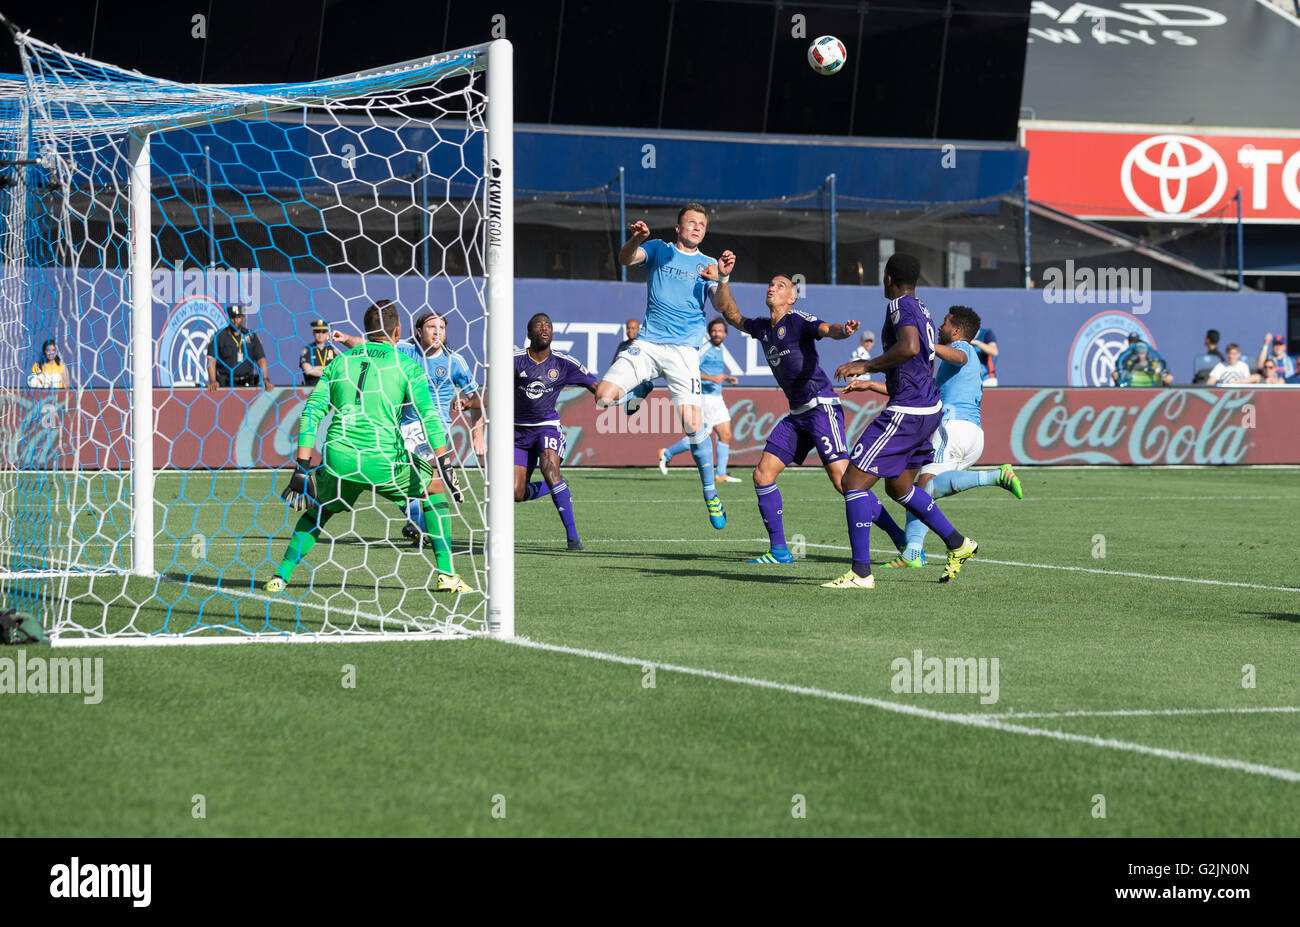 New York, NY USA - May 29, 2016: Frederic Brillant (13) of NYC FC scores goal during MLS match against Orlando City SC on Yankee stadium Stock Photo